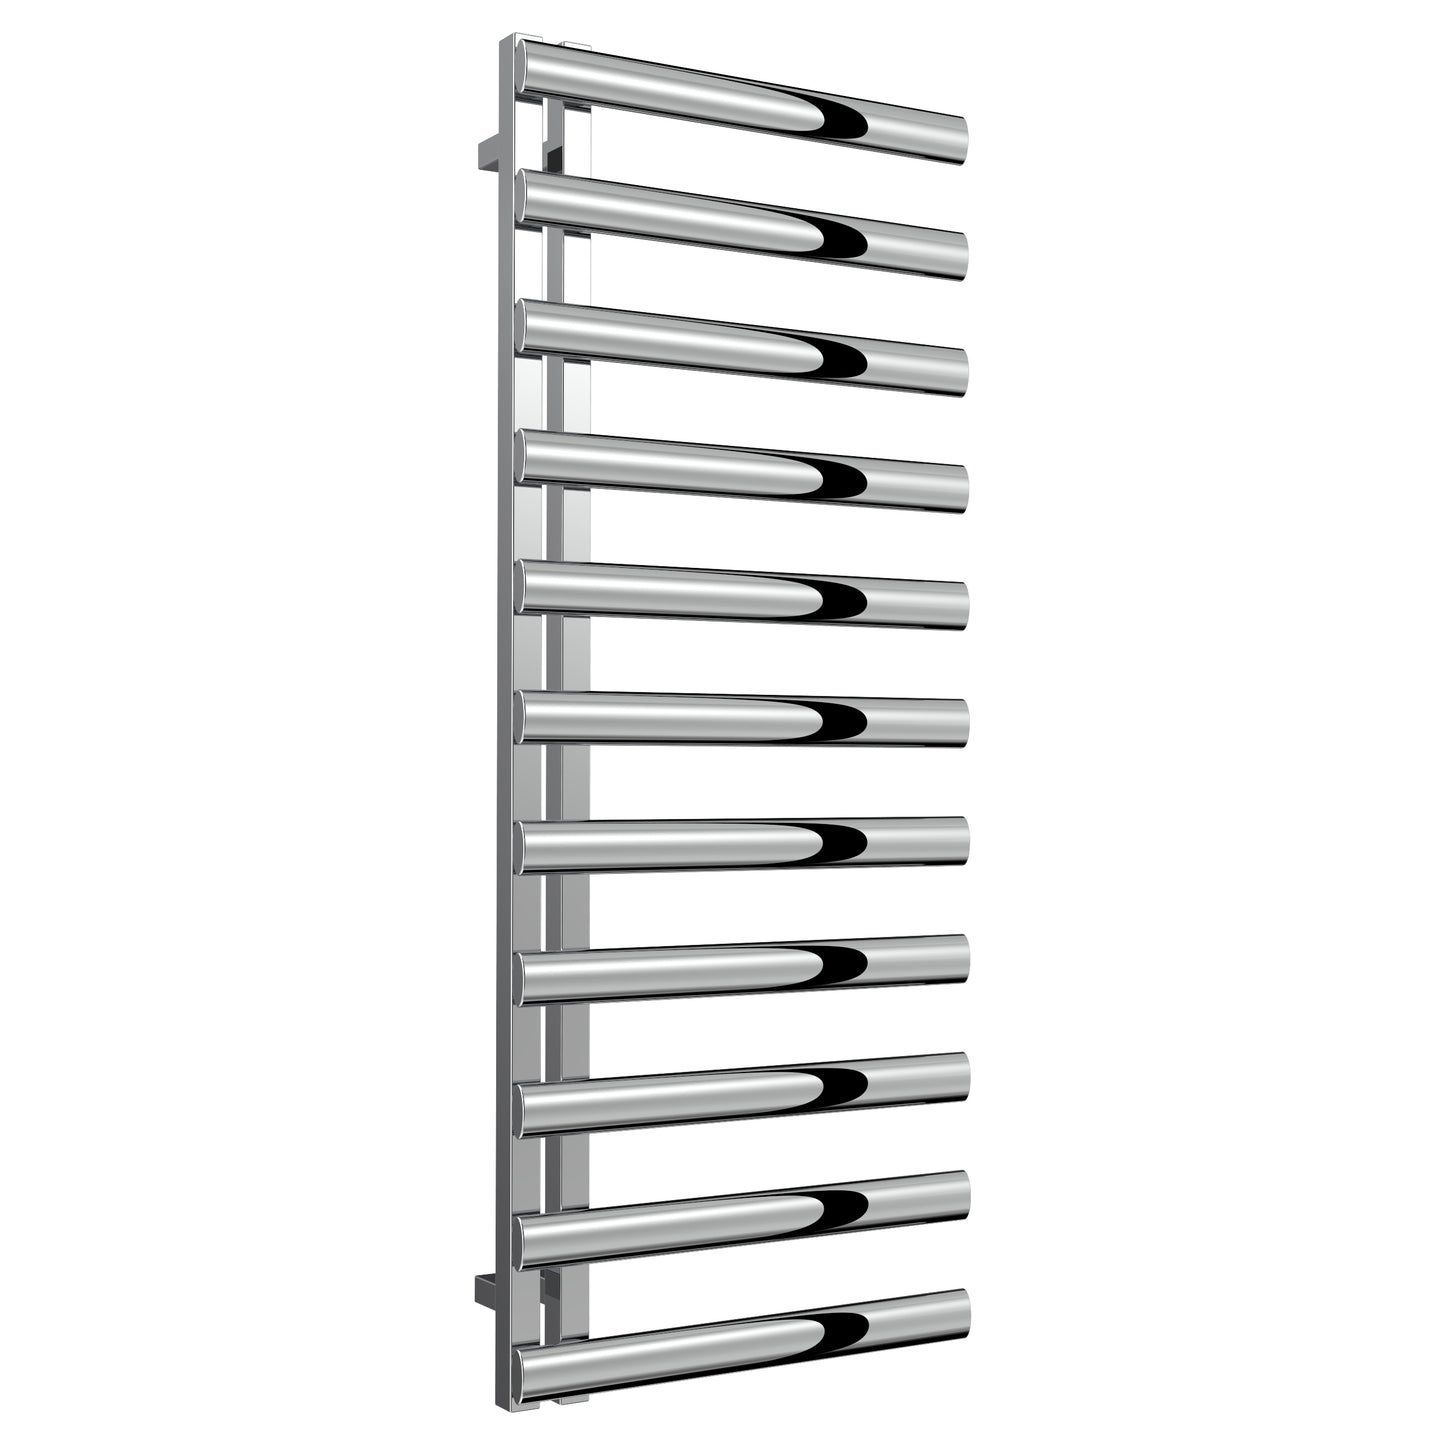 Cavo Stainless Steel Heated Towel Rail - Various Sizes - Polished Stainless Steel